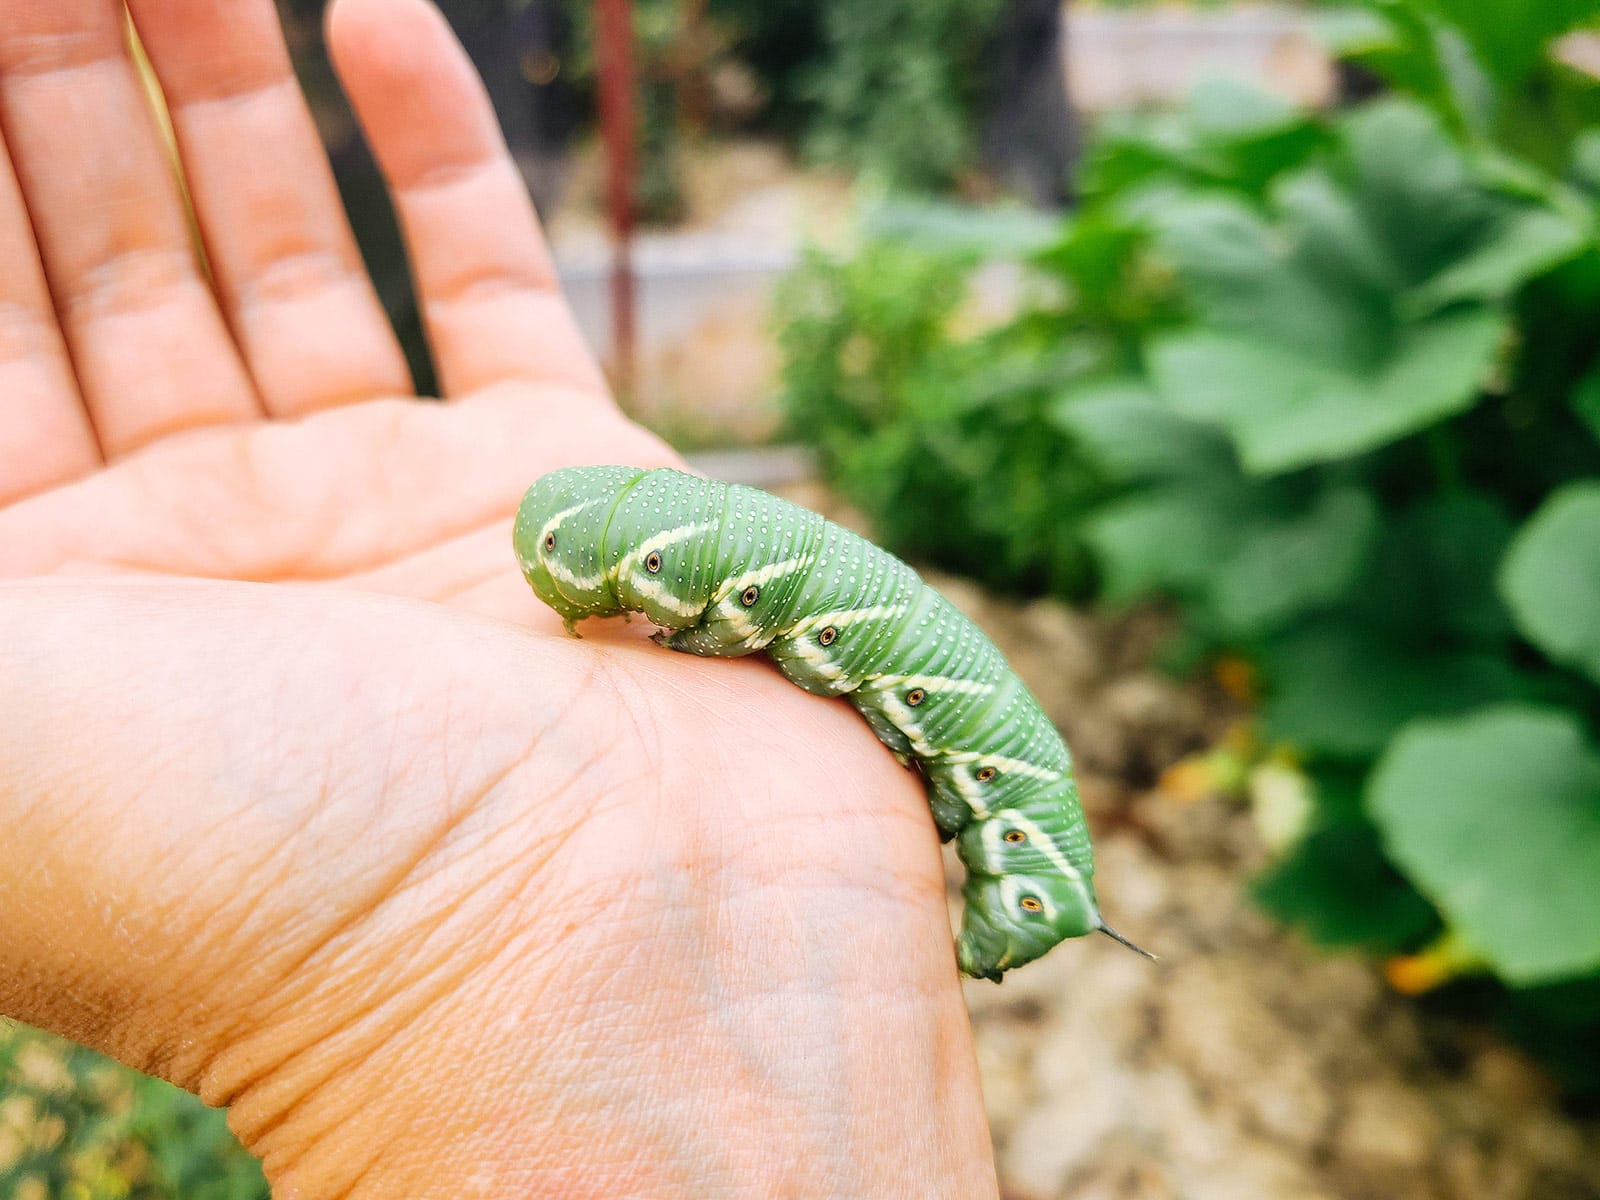 Natural ways to get rid of tomato hornworms (for good)